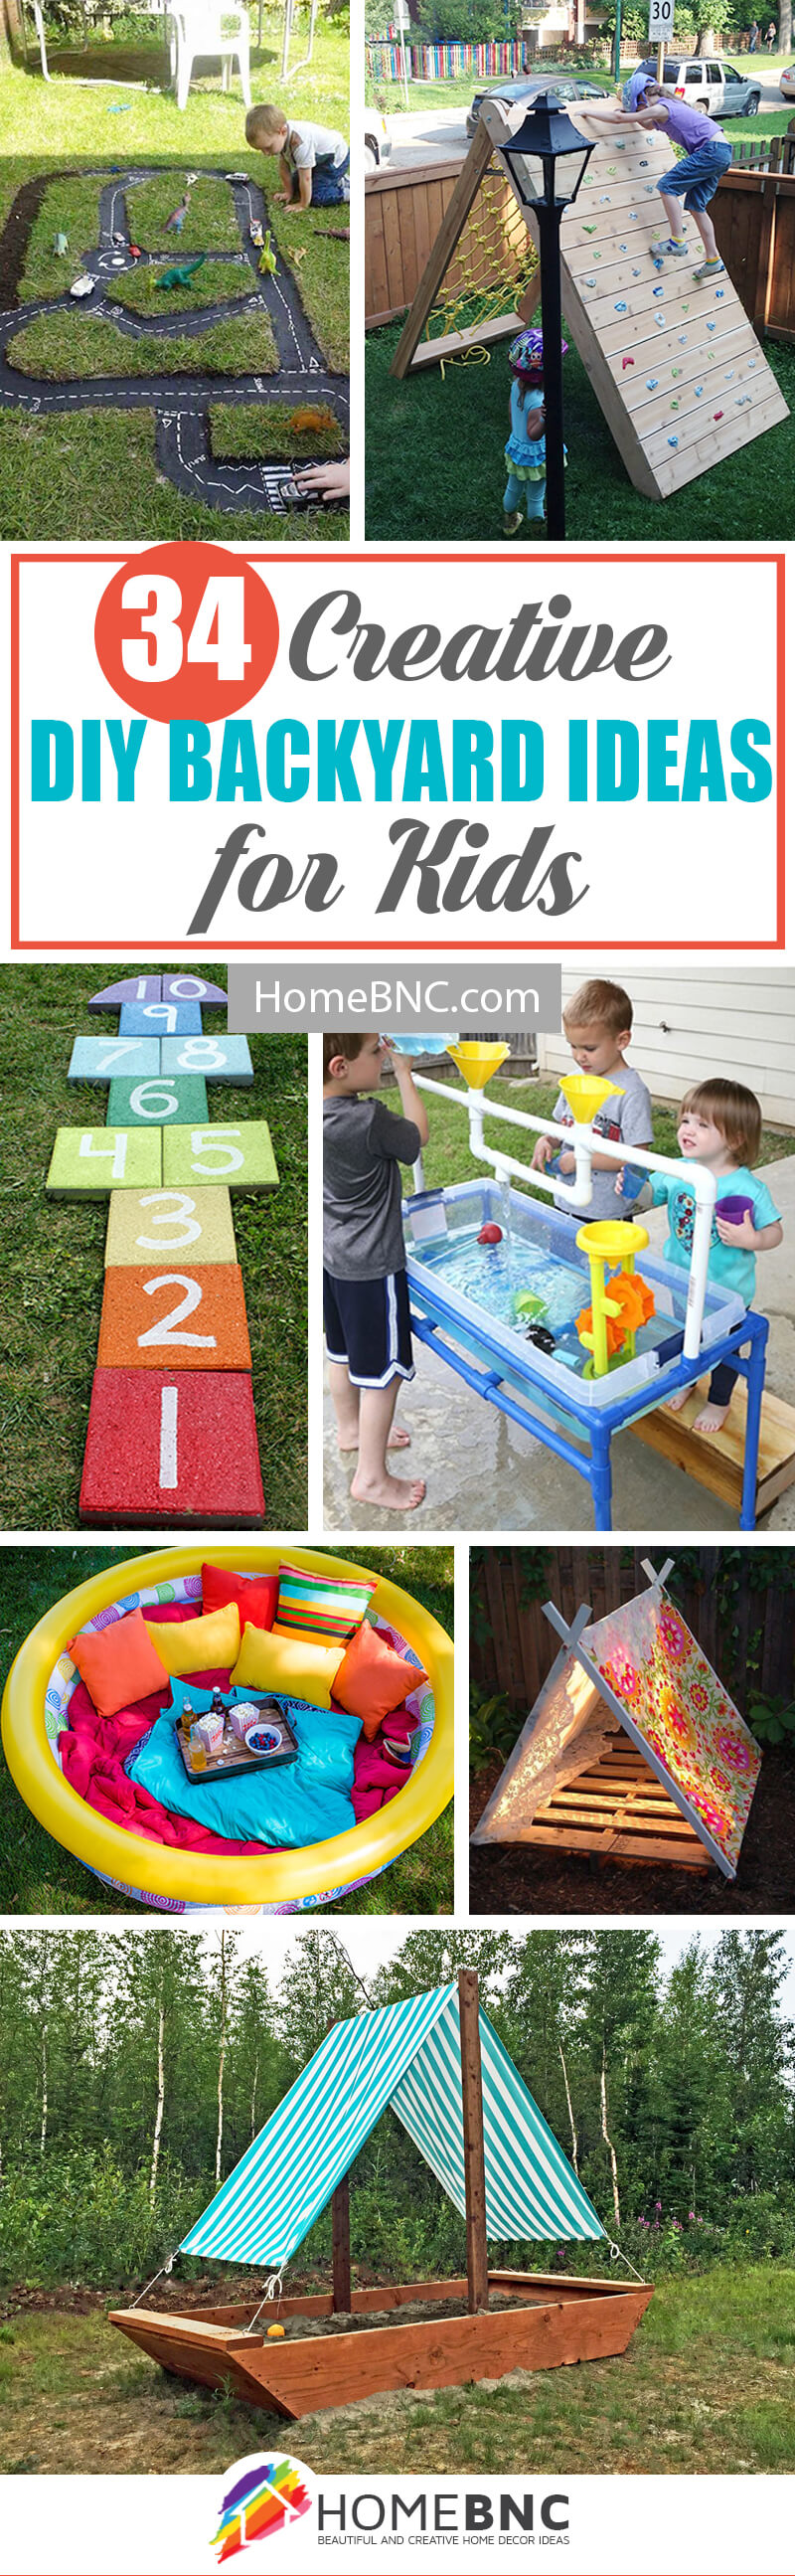 34 Best DIY Backyard Ideas and Designs for Kids in 2017